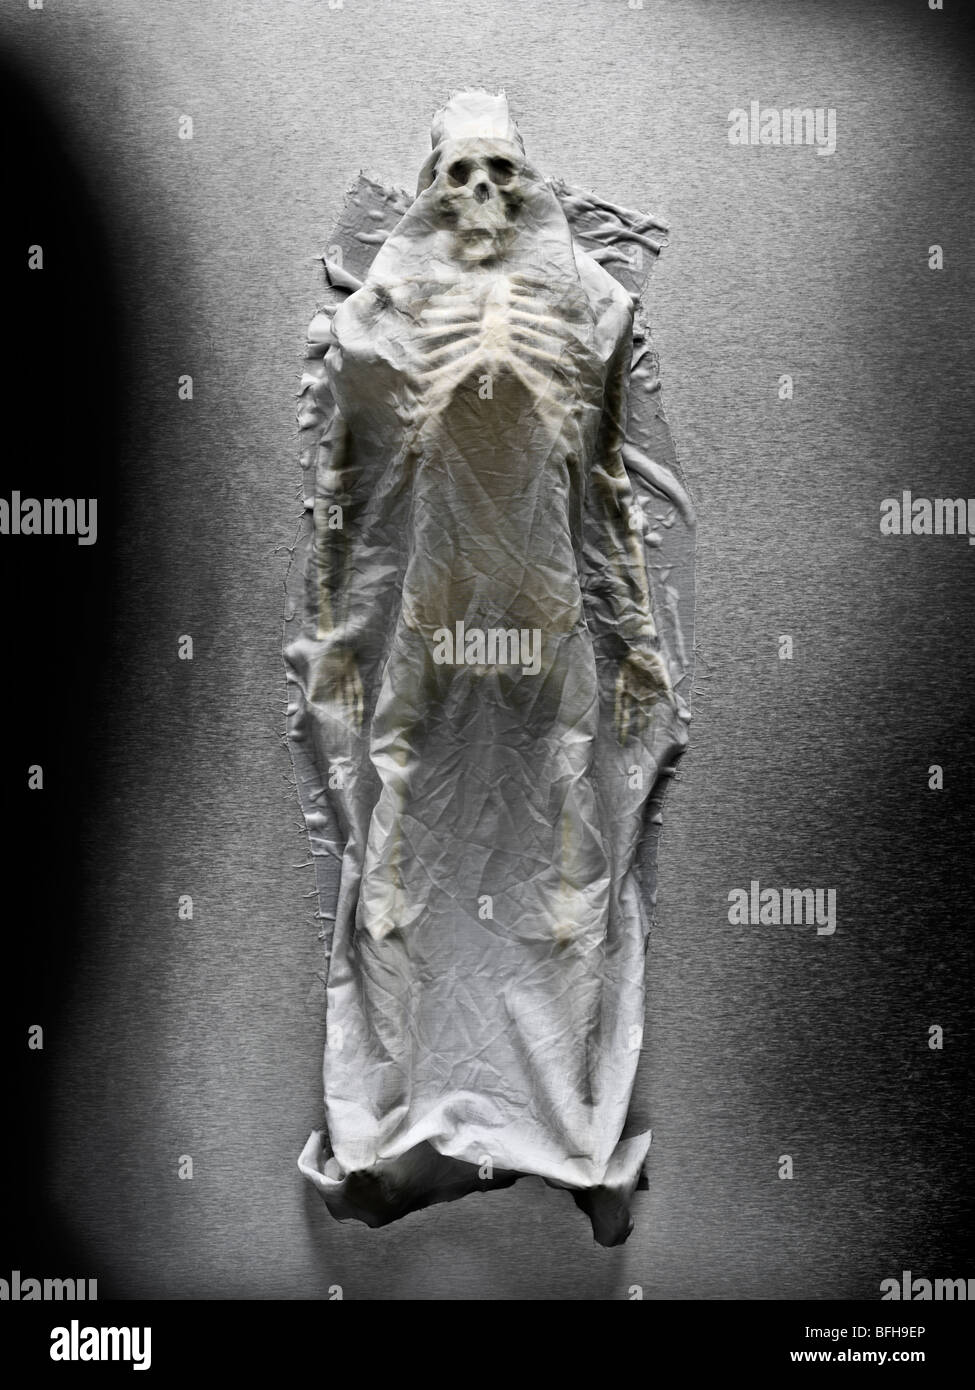 human skeleton model covered with a cloth Stock Photo